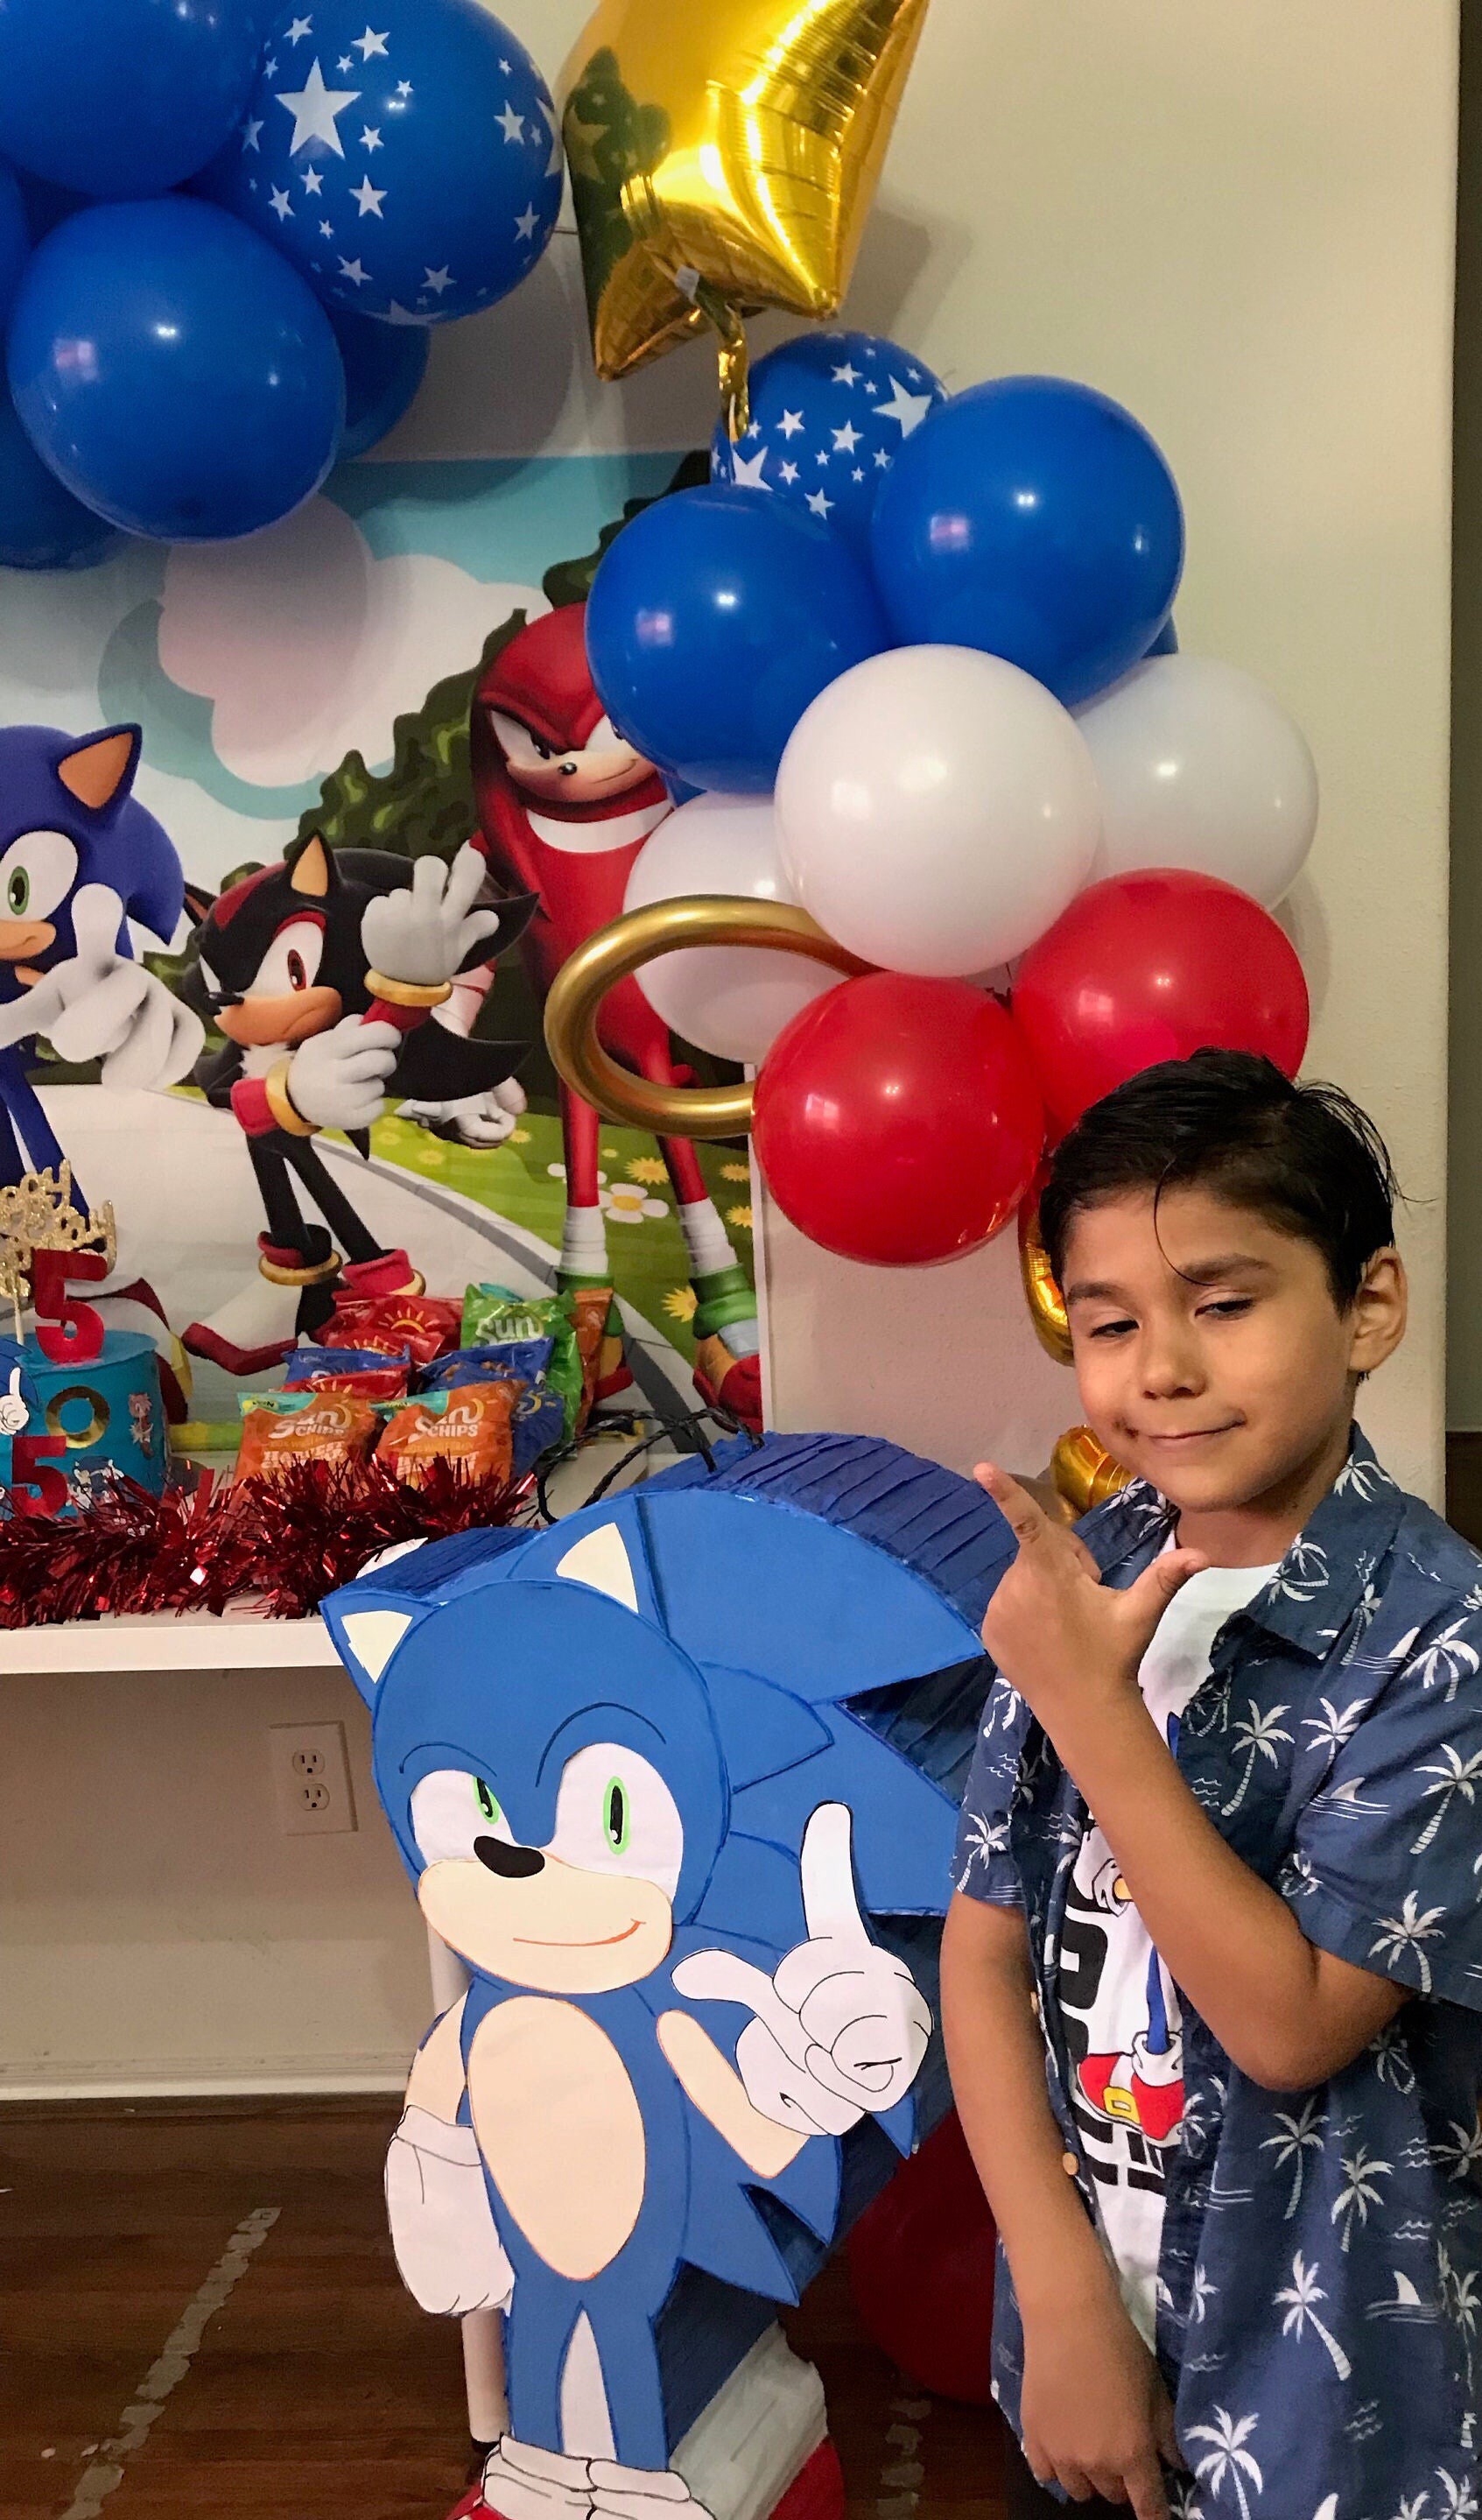 Large Sonic pinata-sonic party- sonic theme- party decorations